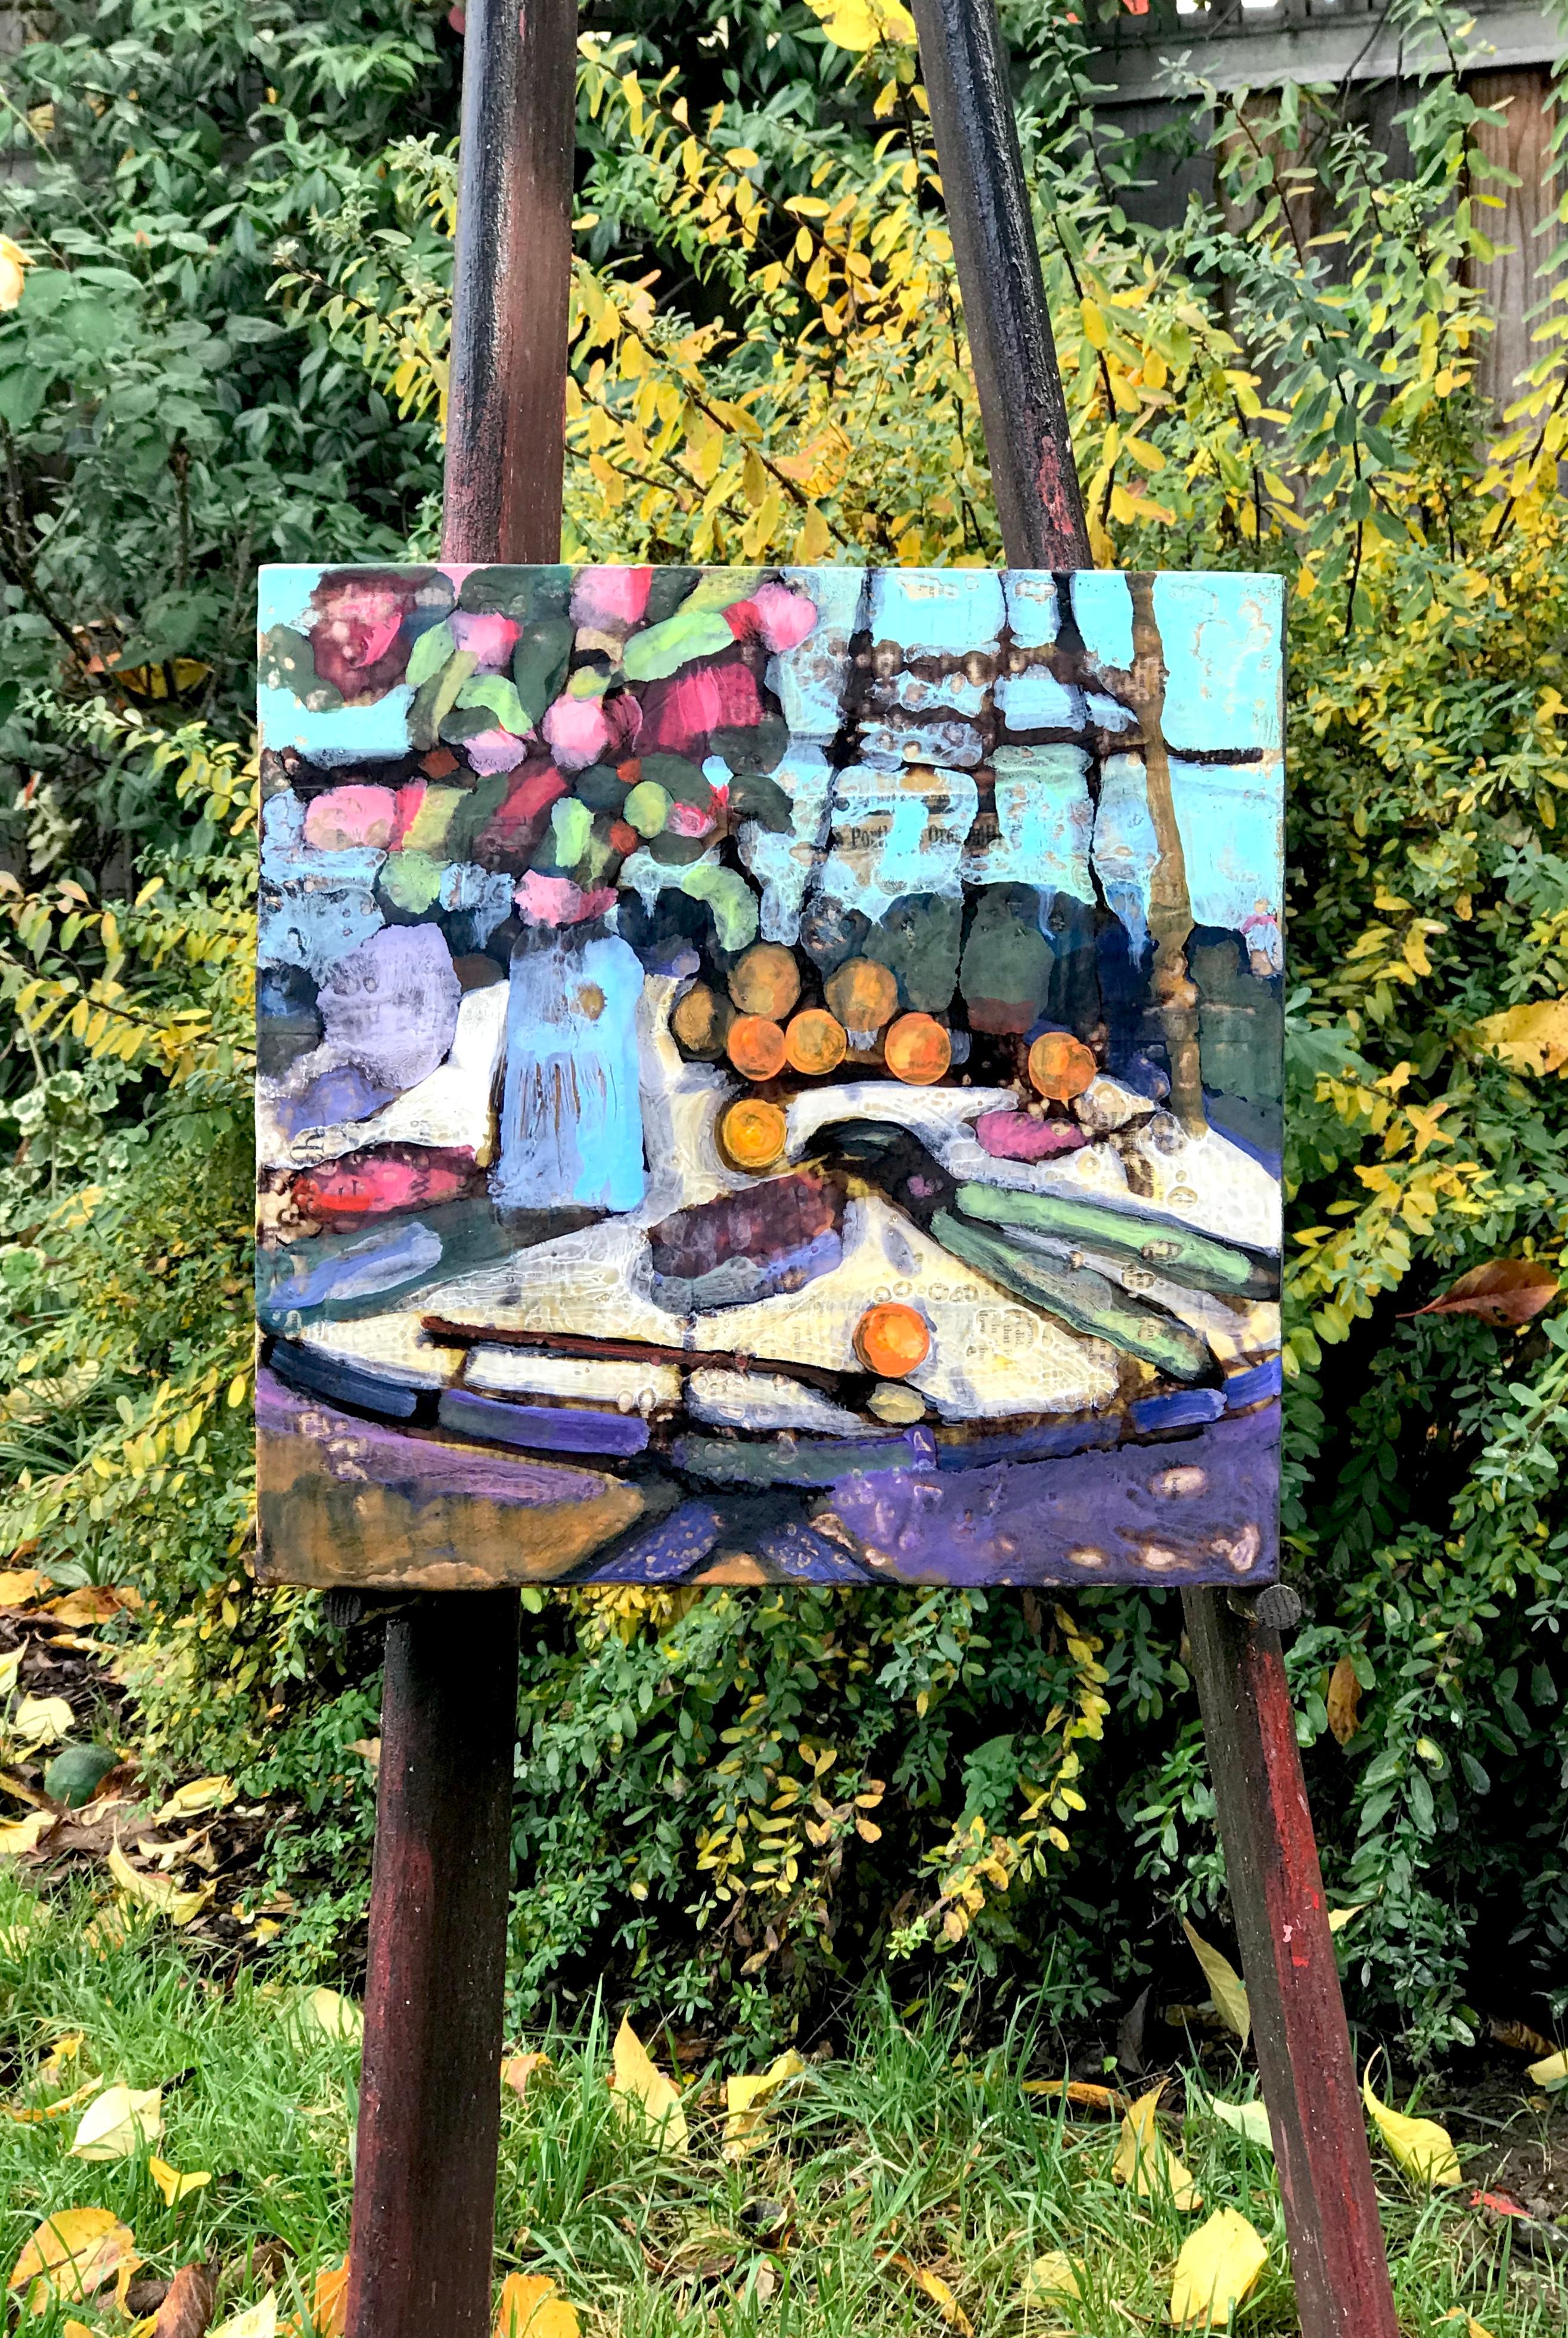 <p>Artist Comments<br>I built a cradled wood panel, covered it in 1906 ephemera collage, then coated it with beeswax and paint using a blowtorch. I enjoyed painting these personal objects that tell a story.</p><br/><p>About the Artist<br>When James